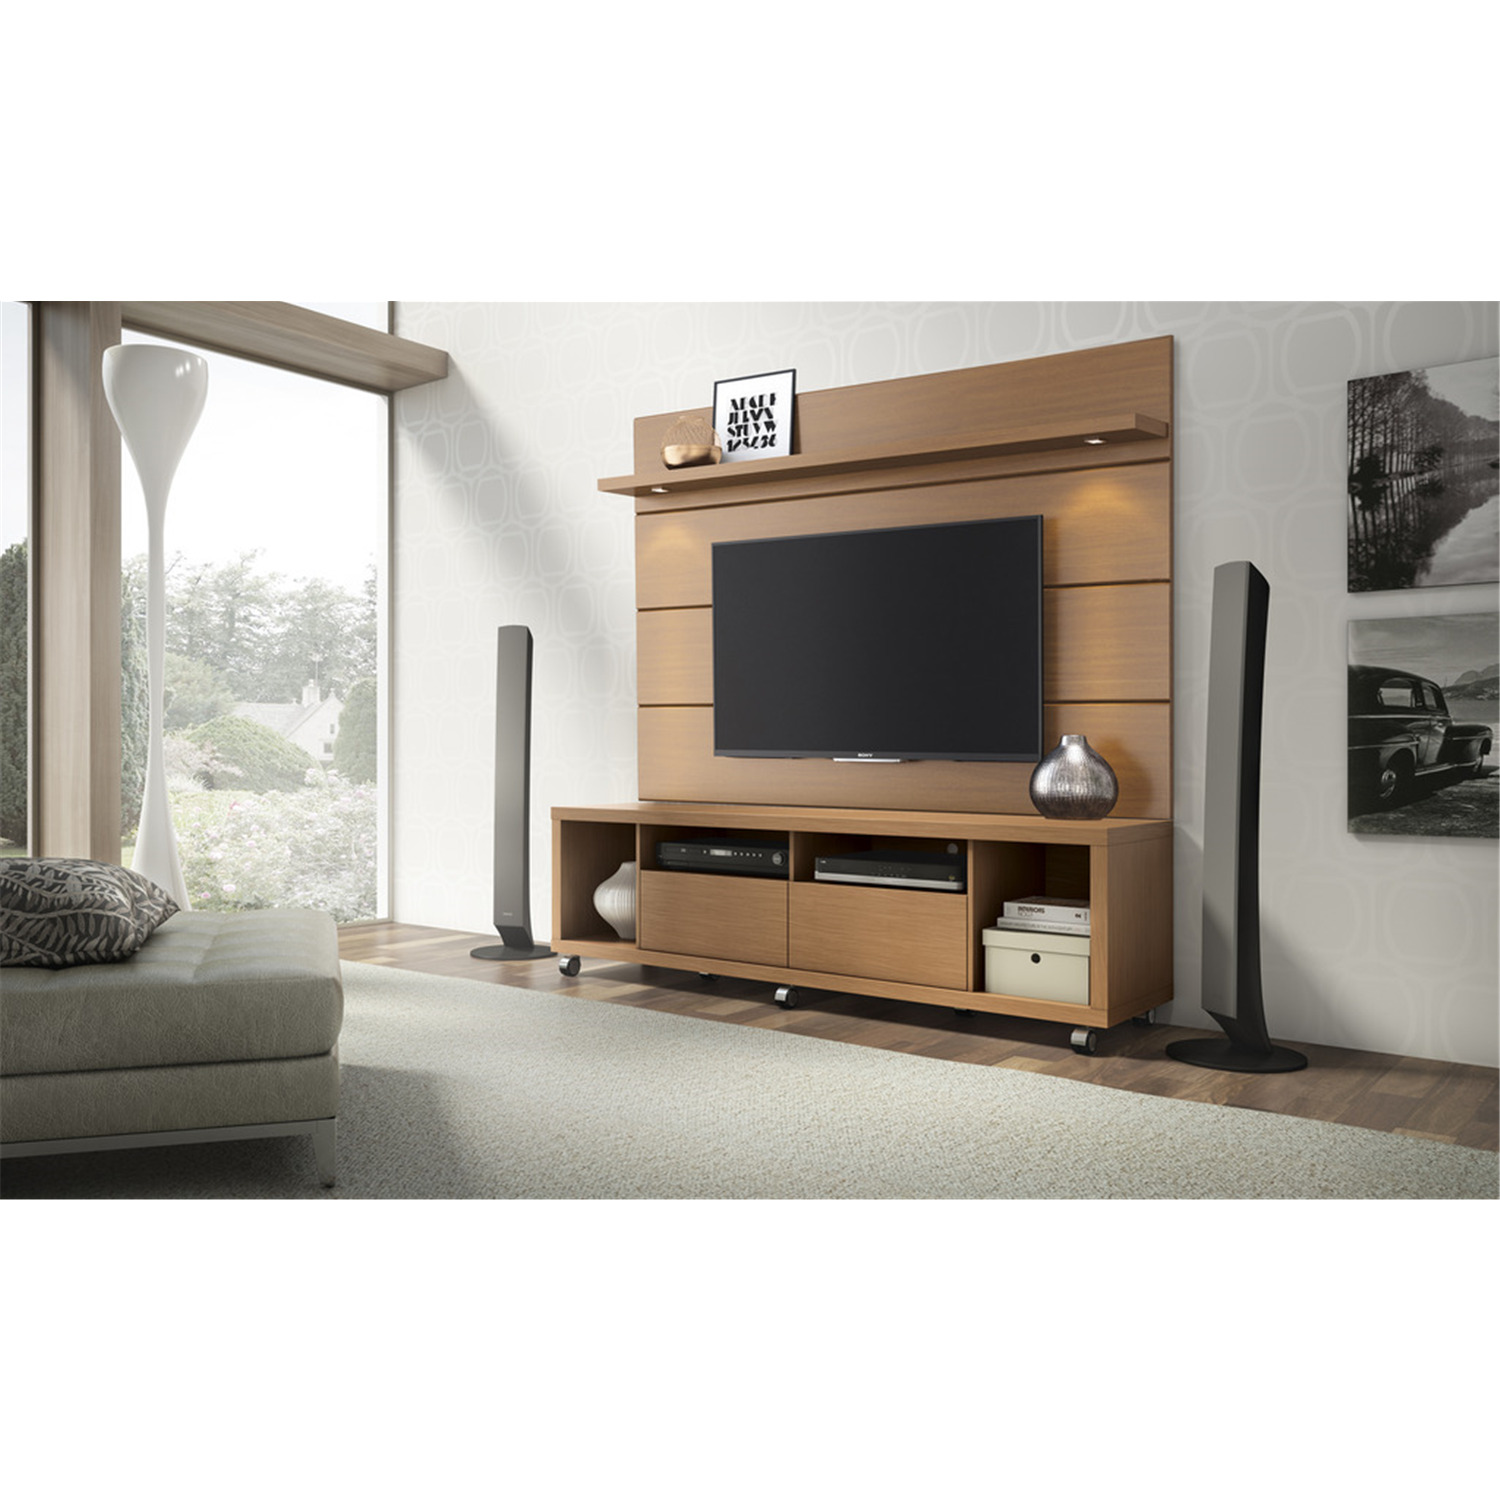 Cabrini TV Stand and Floating Wall TV Panel with LED Lights 1.8 - image 2 of 3